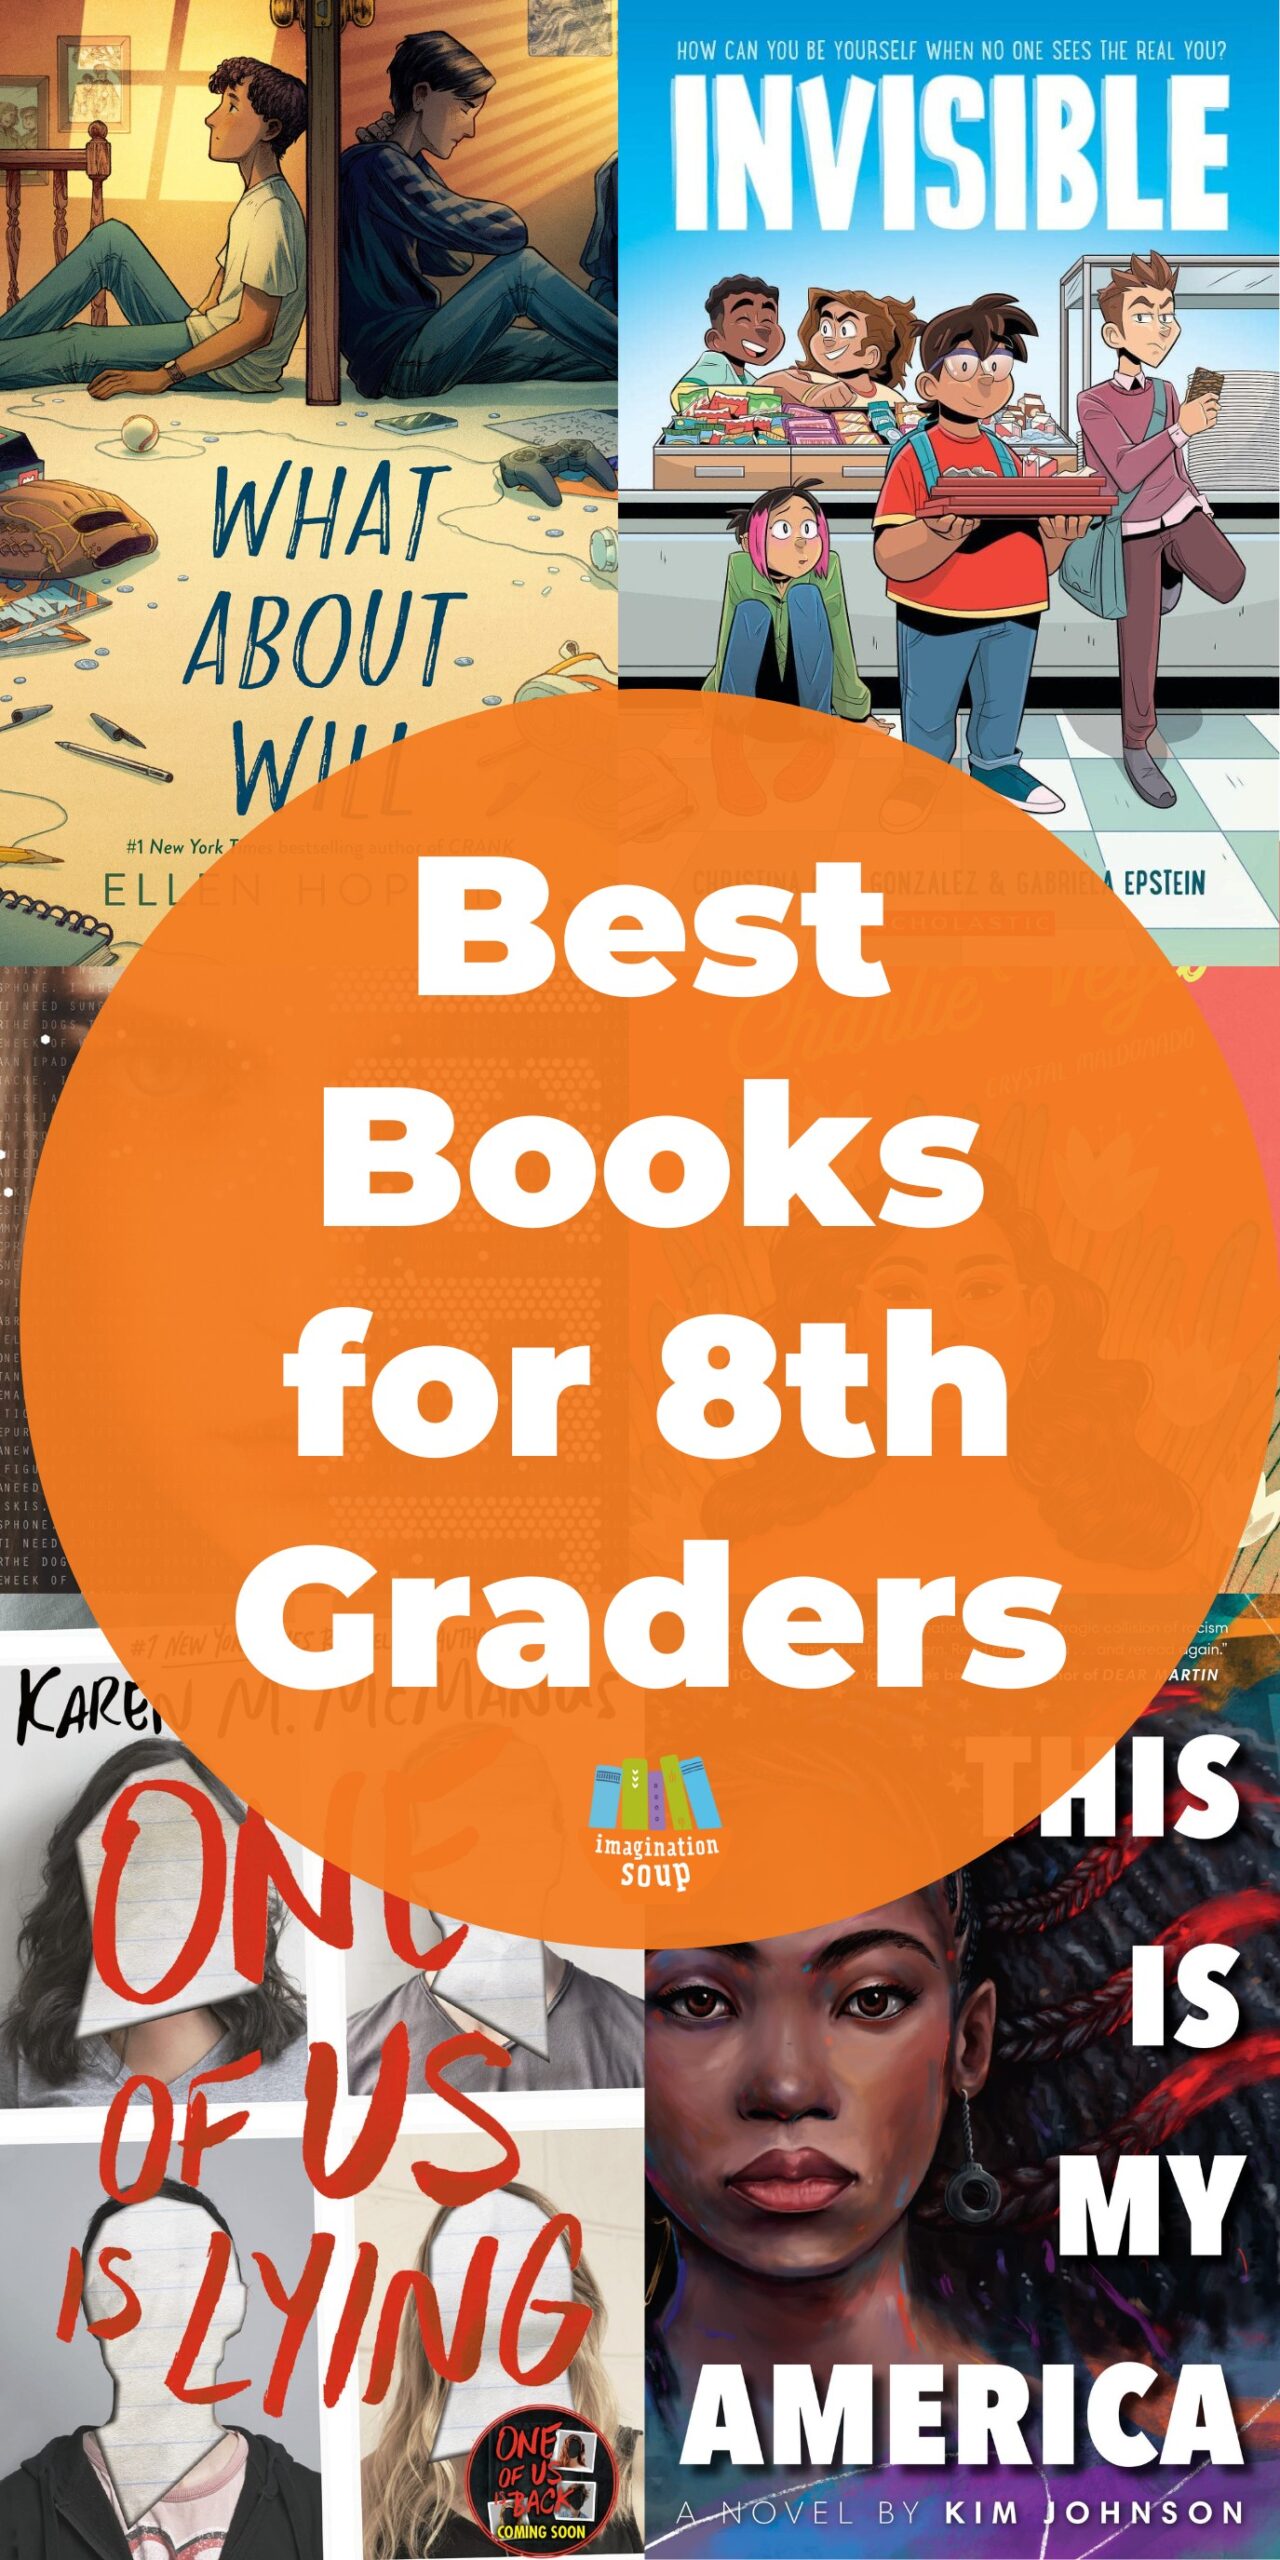 Are you looking for the best books for 8th graders? Do you have a reluctant reader in 8th grade or upper middle school? Sometimes these kids have not yet met the right book. Here are some possible page-turners for your 8th grade readers! Everything from true stories to thought-provoking realistic fiction is on this list that straddles upper middle grade and young adult books. 